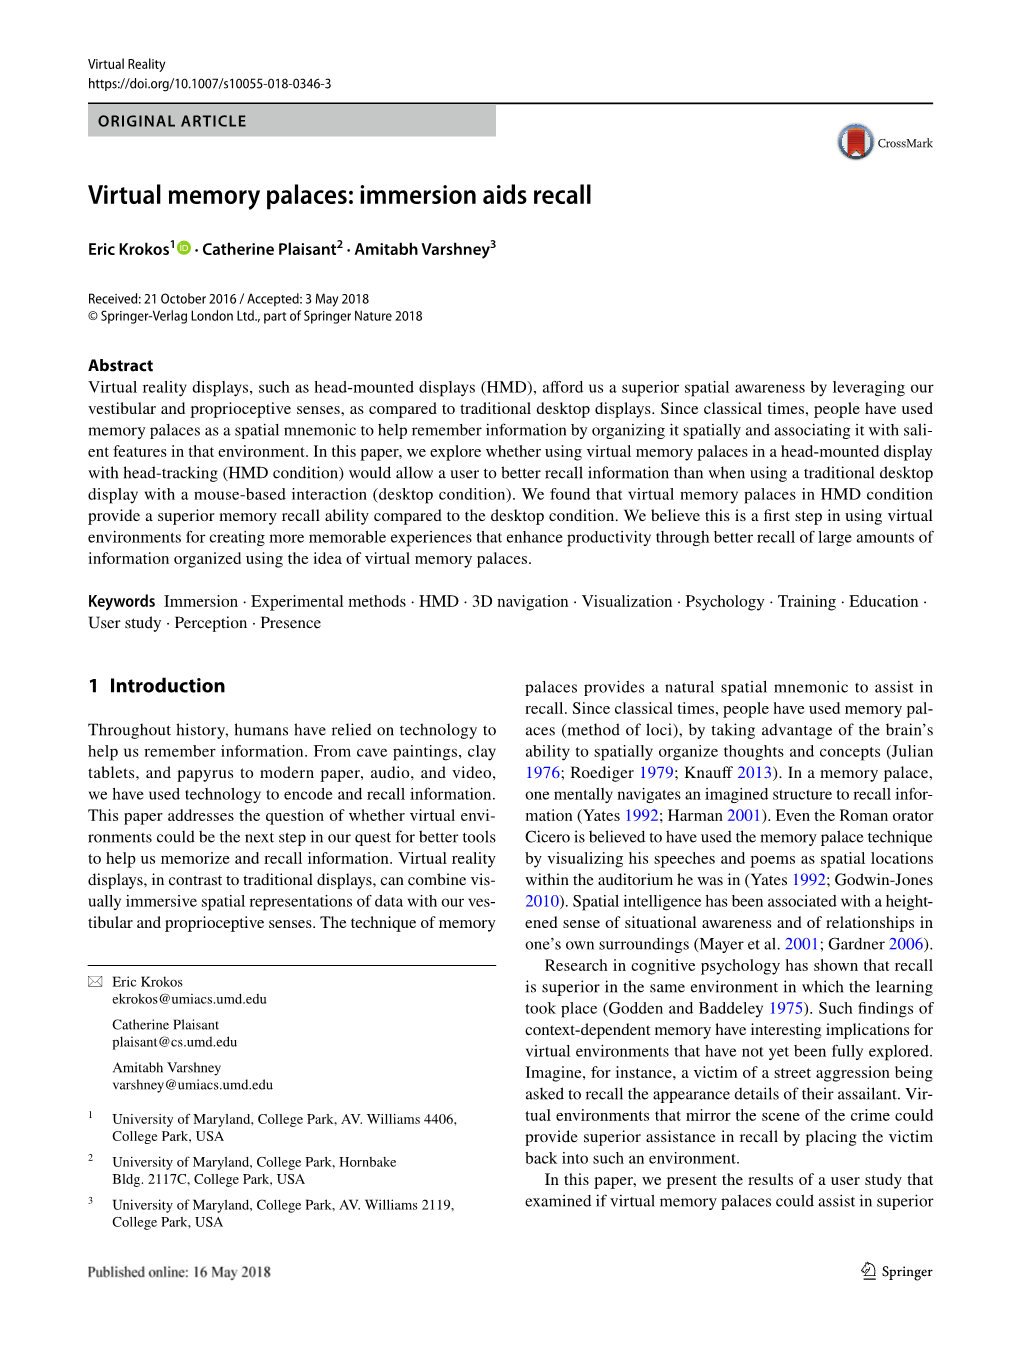 Virtual Memory Palaces: Immersion Aids Recall